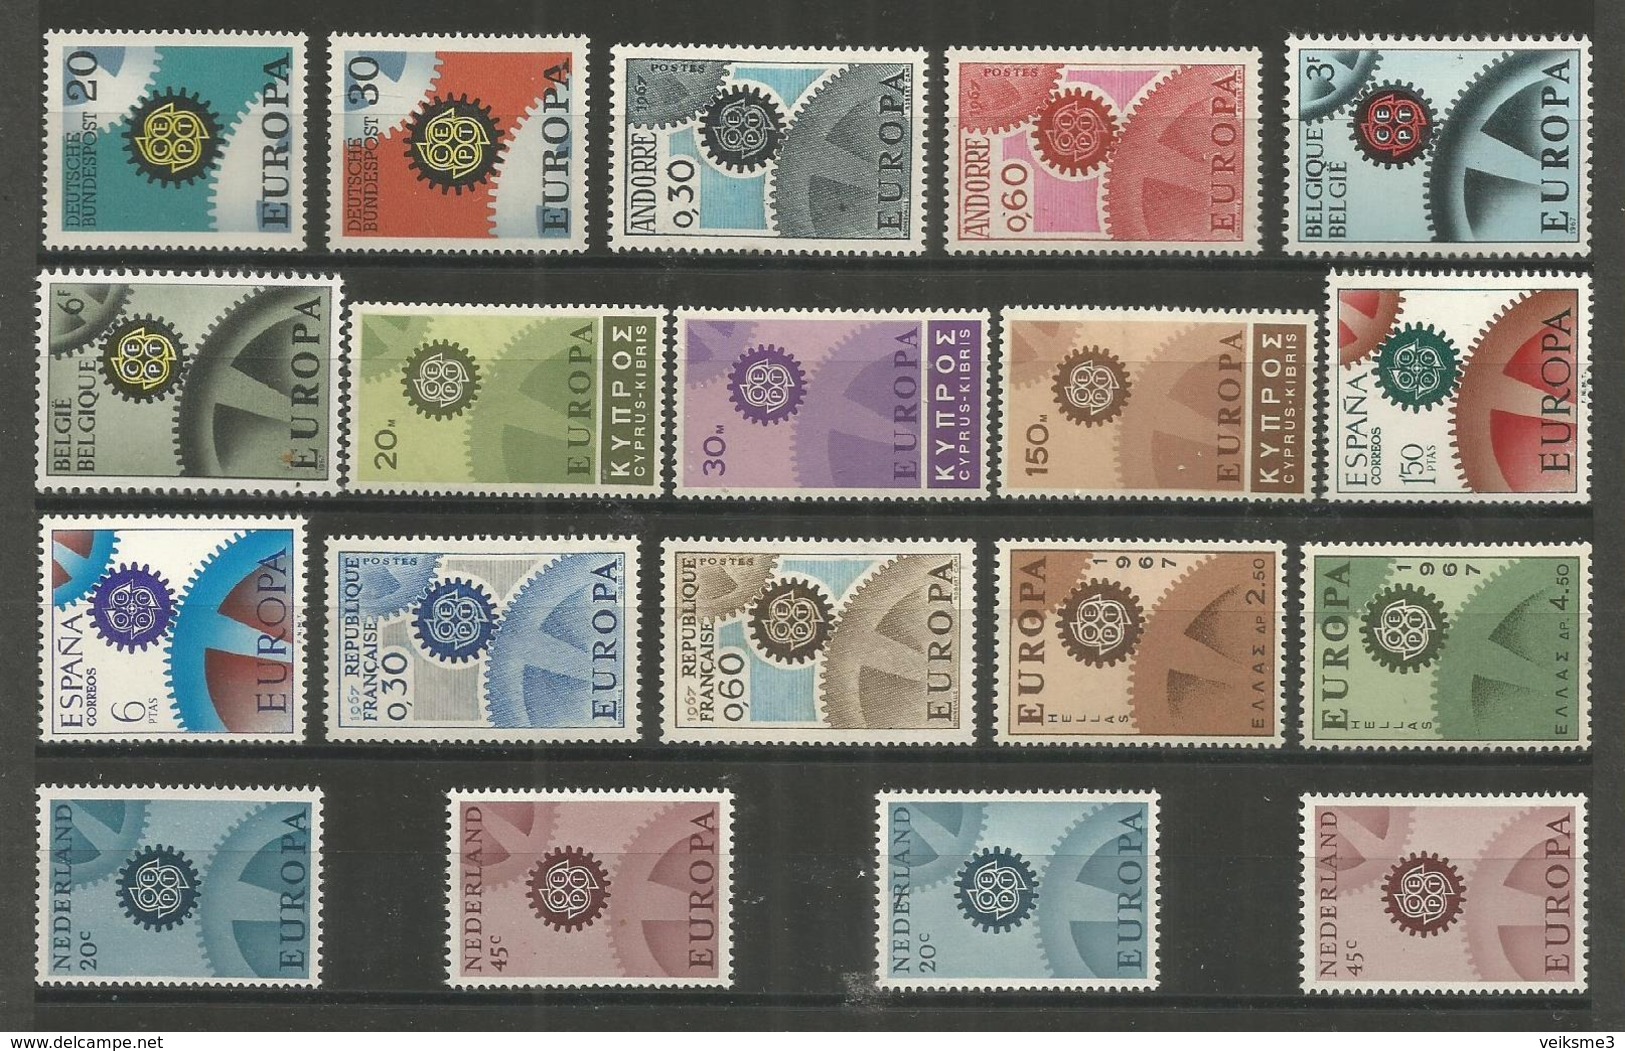 19 Stamps DIFFERENT - MNH - Europa-CEPT - Art - 1967 - 1967